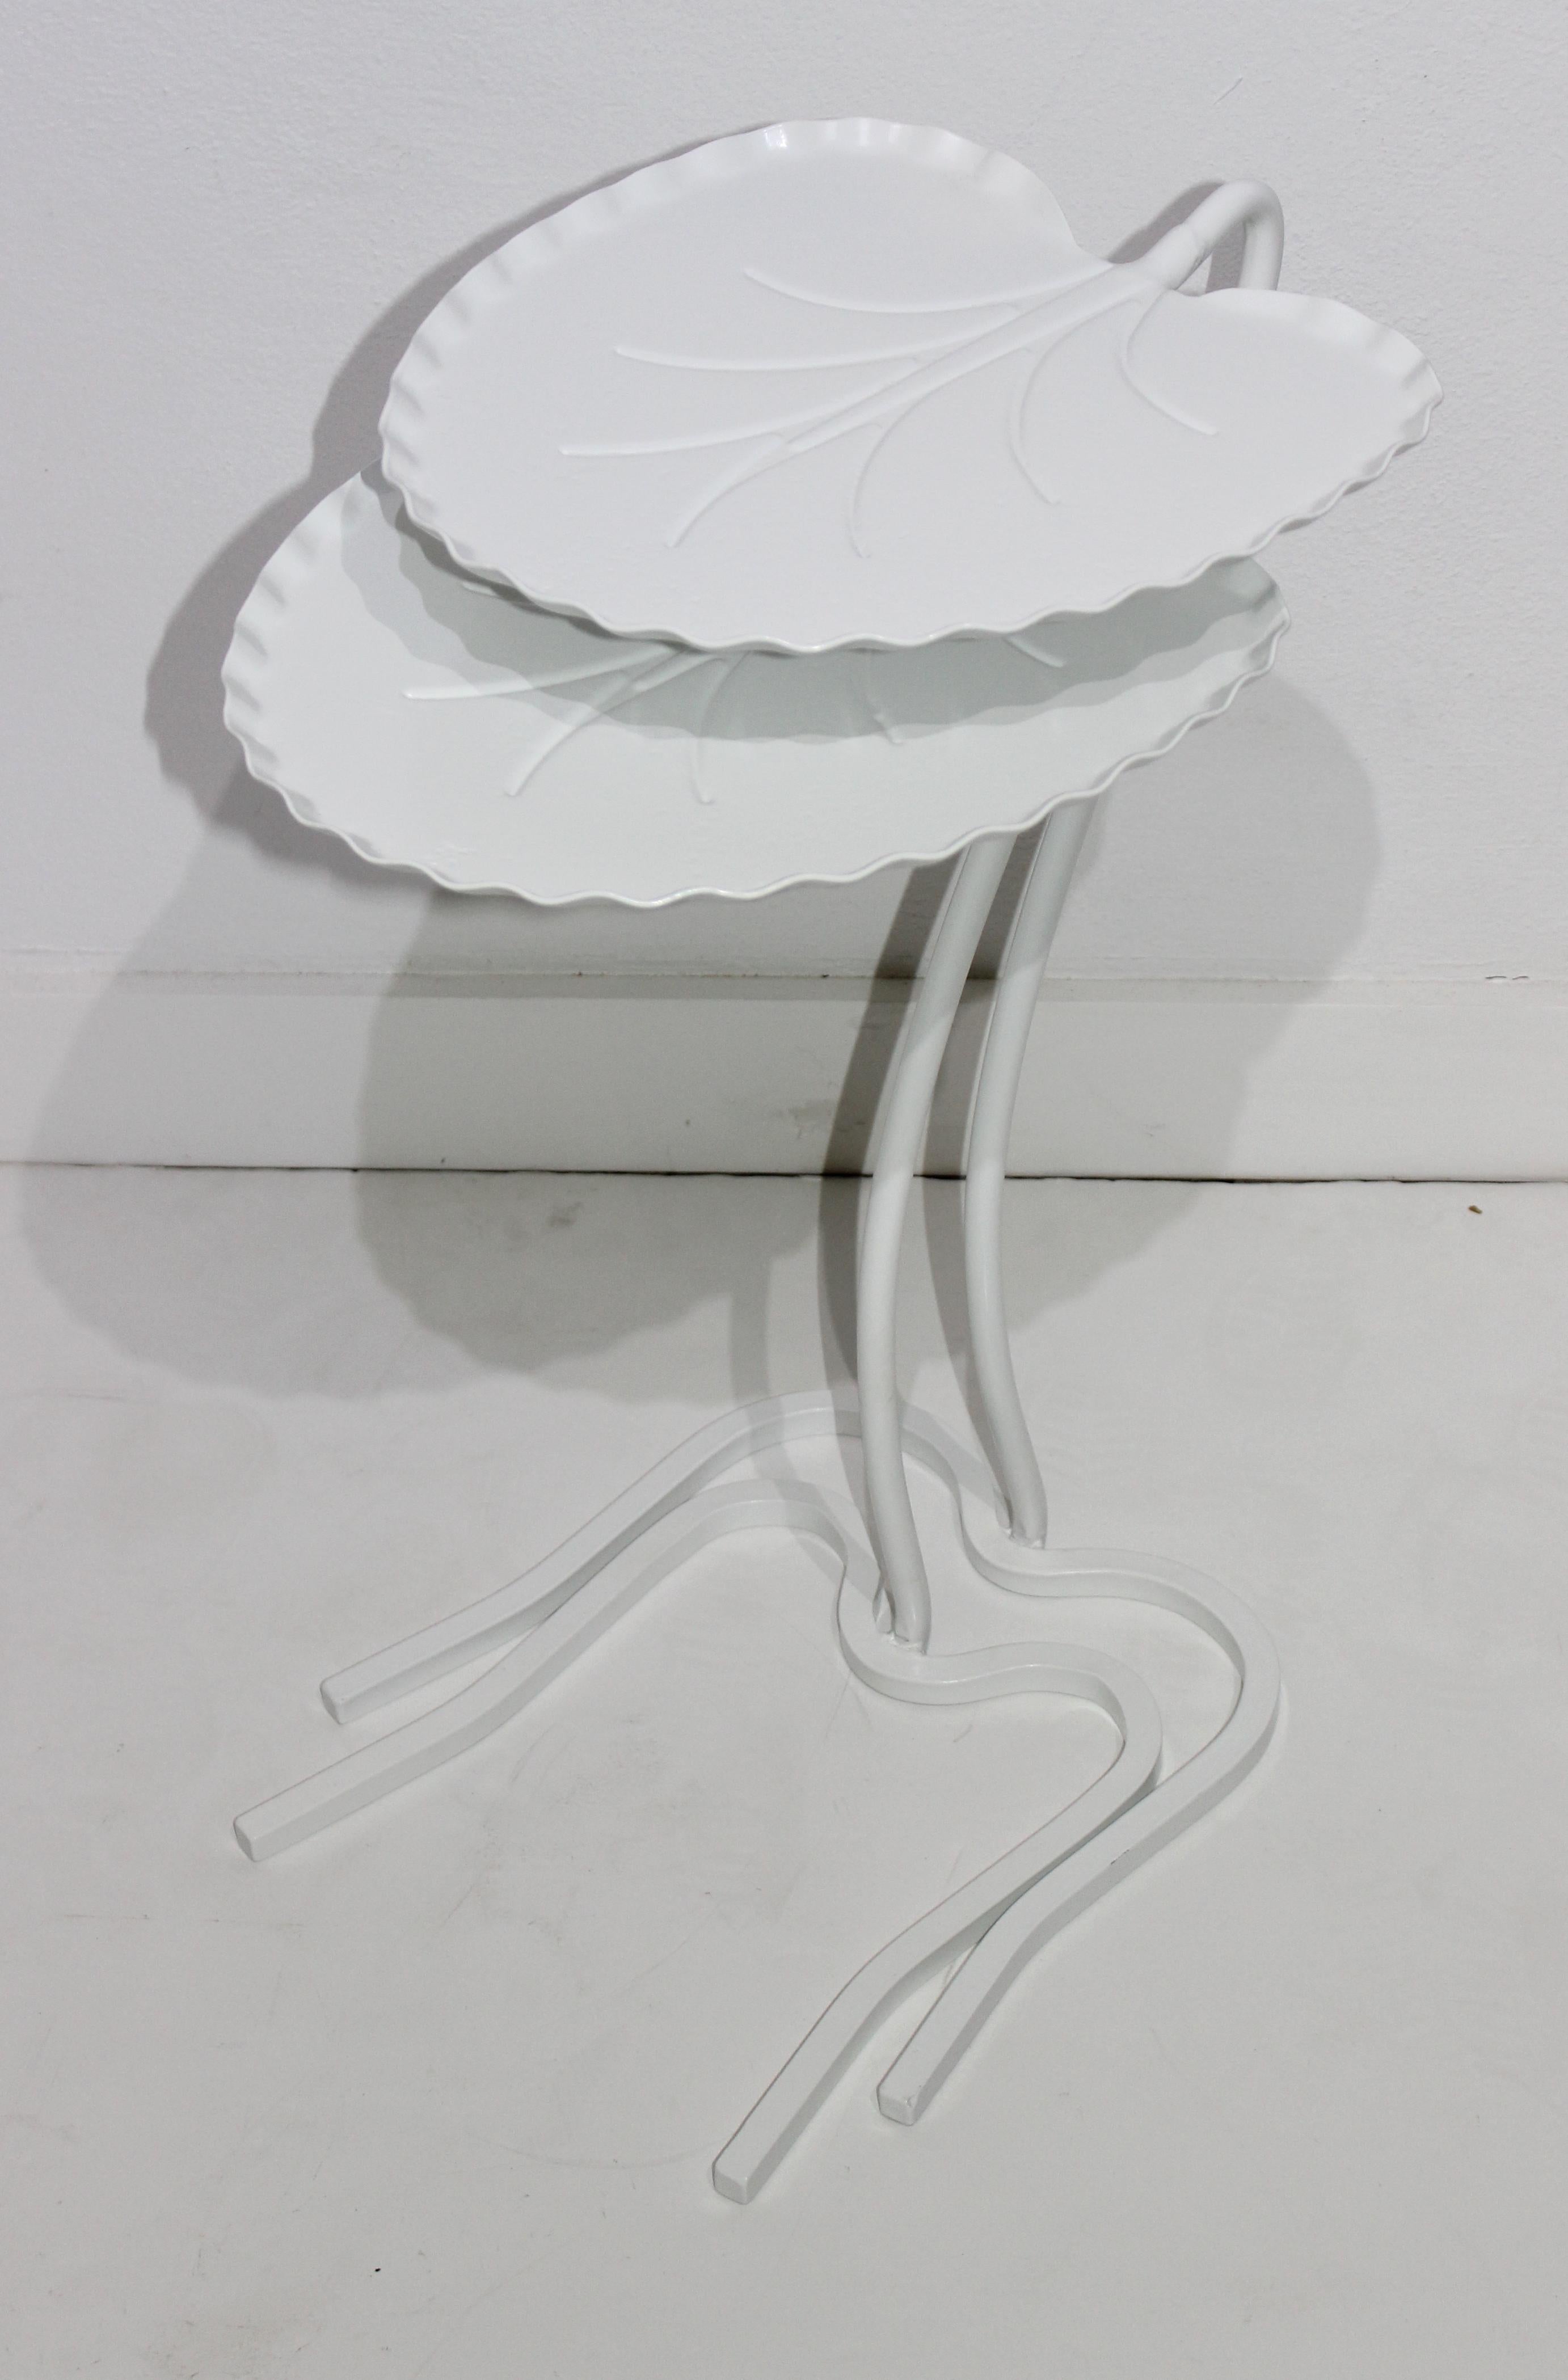 This stylish and iconic set of Salterini lily pad tables will make a statement around the POOL, or perhaps you garden room.

Note: These pieces have been professionally powdercoated in the color Palm Beach White as of 09/15/2020.

Note: